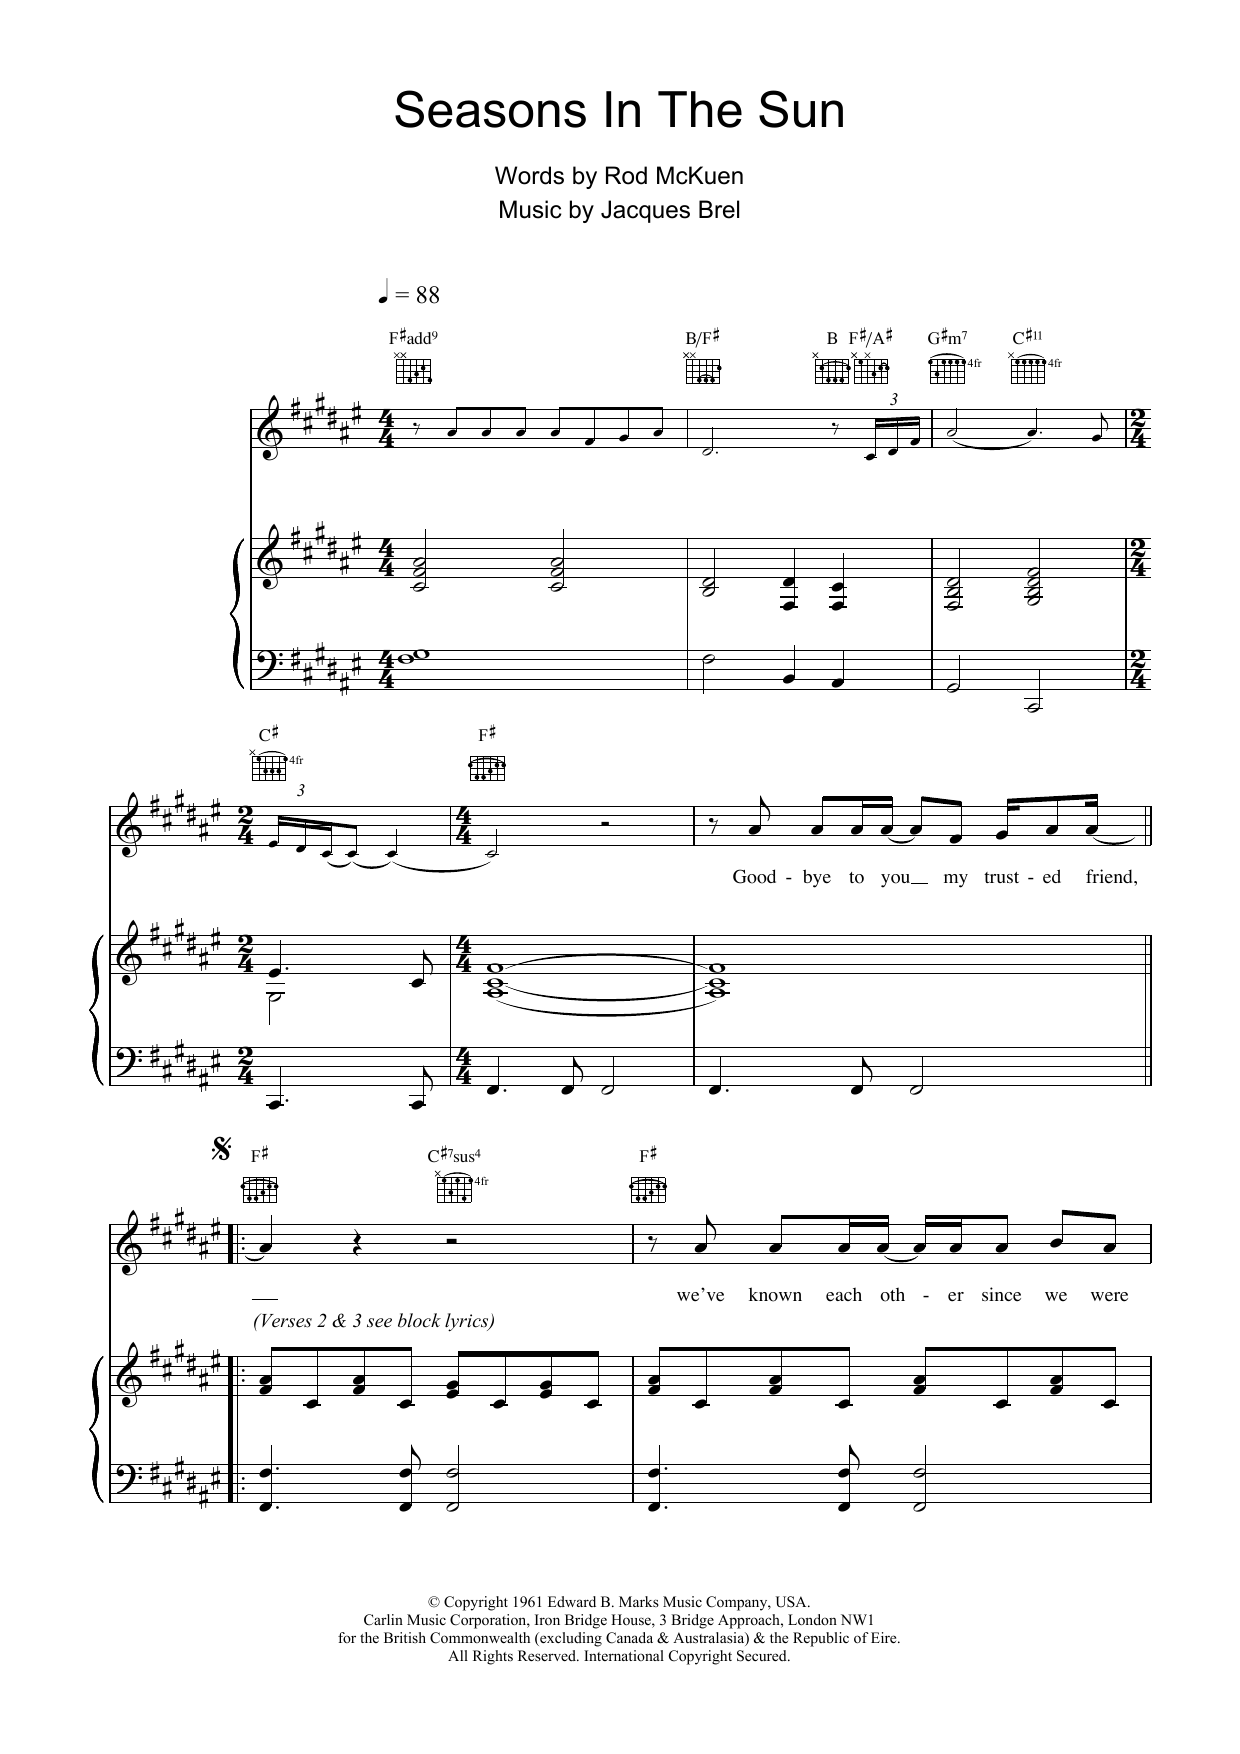 Westlife Seasons In The Sun sheet music notes and chords. Download Printable PDF.